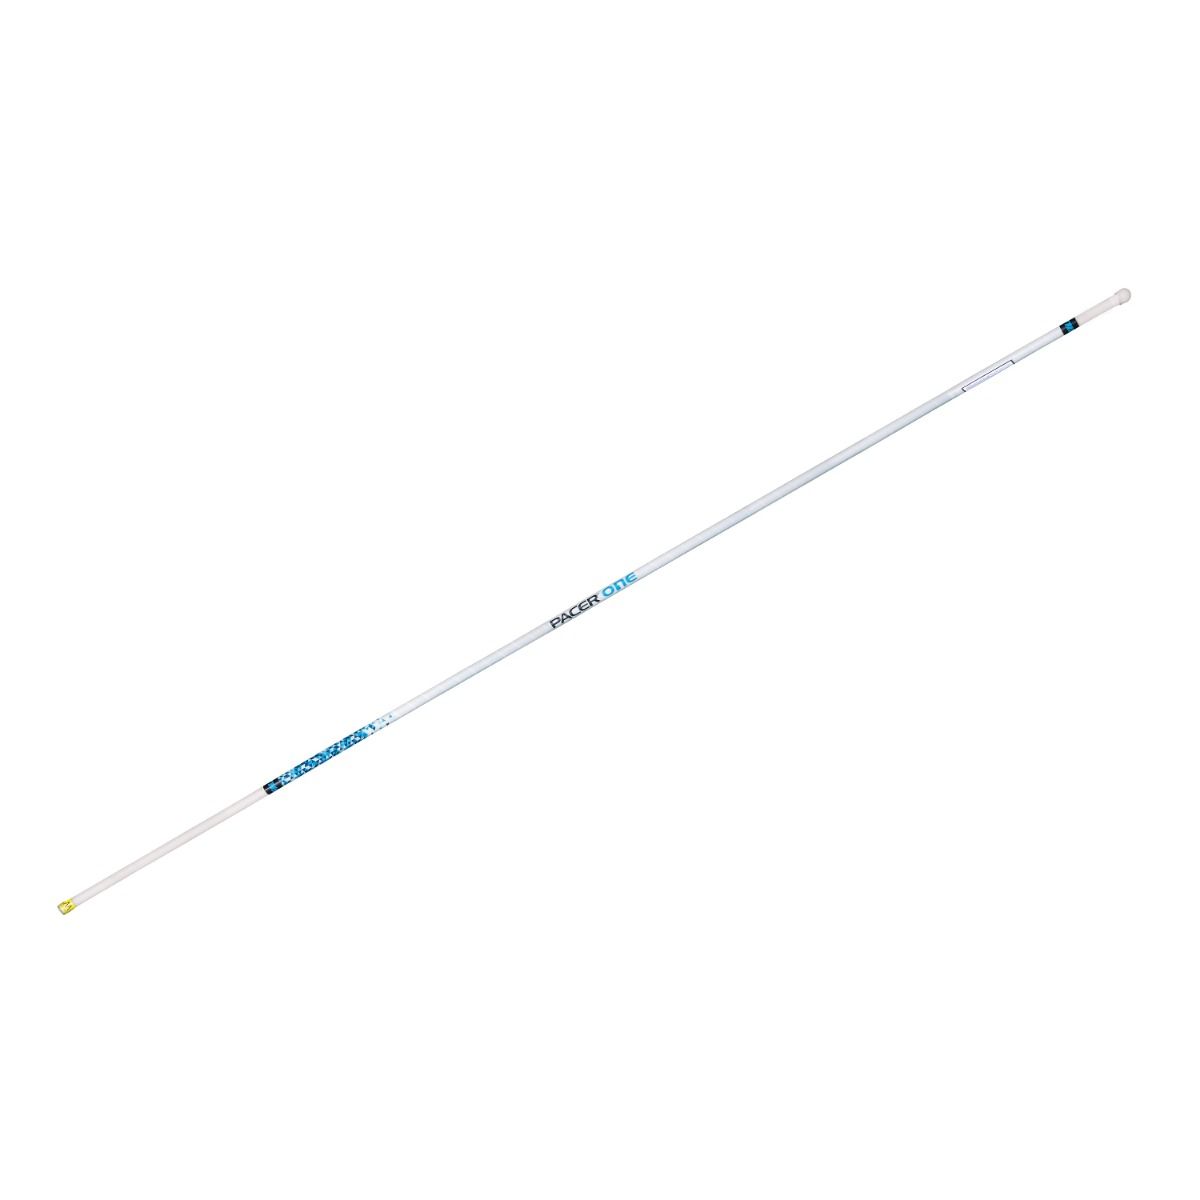 Gill 11' 6" Pacer One Vaulting Pole